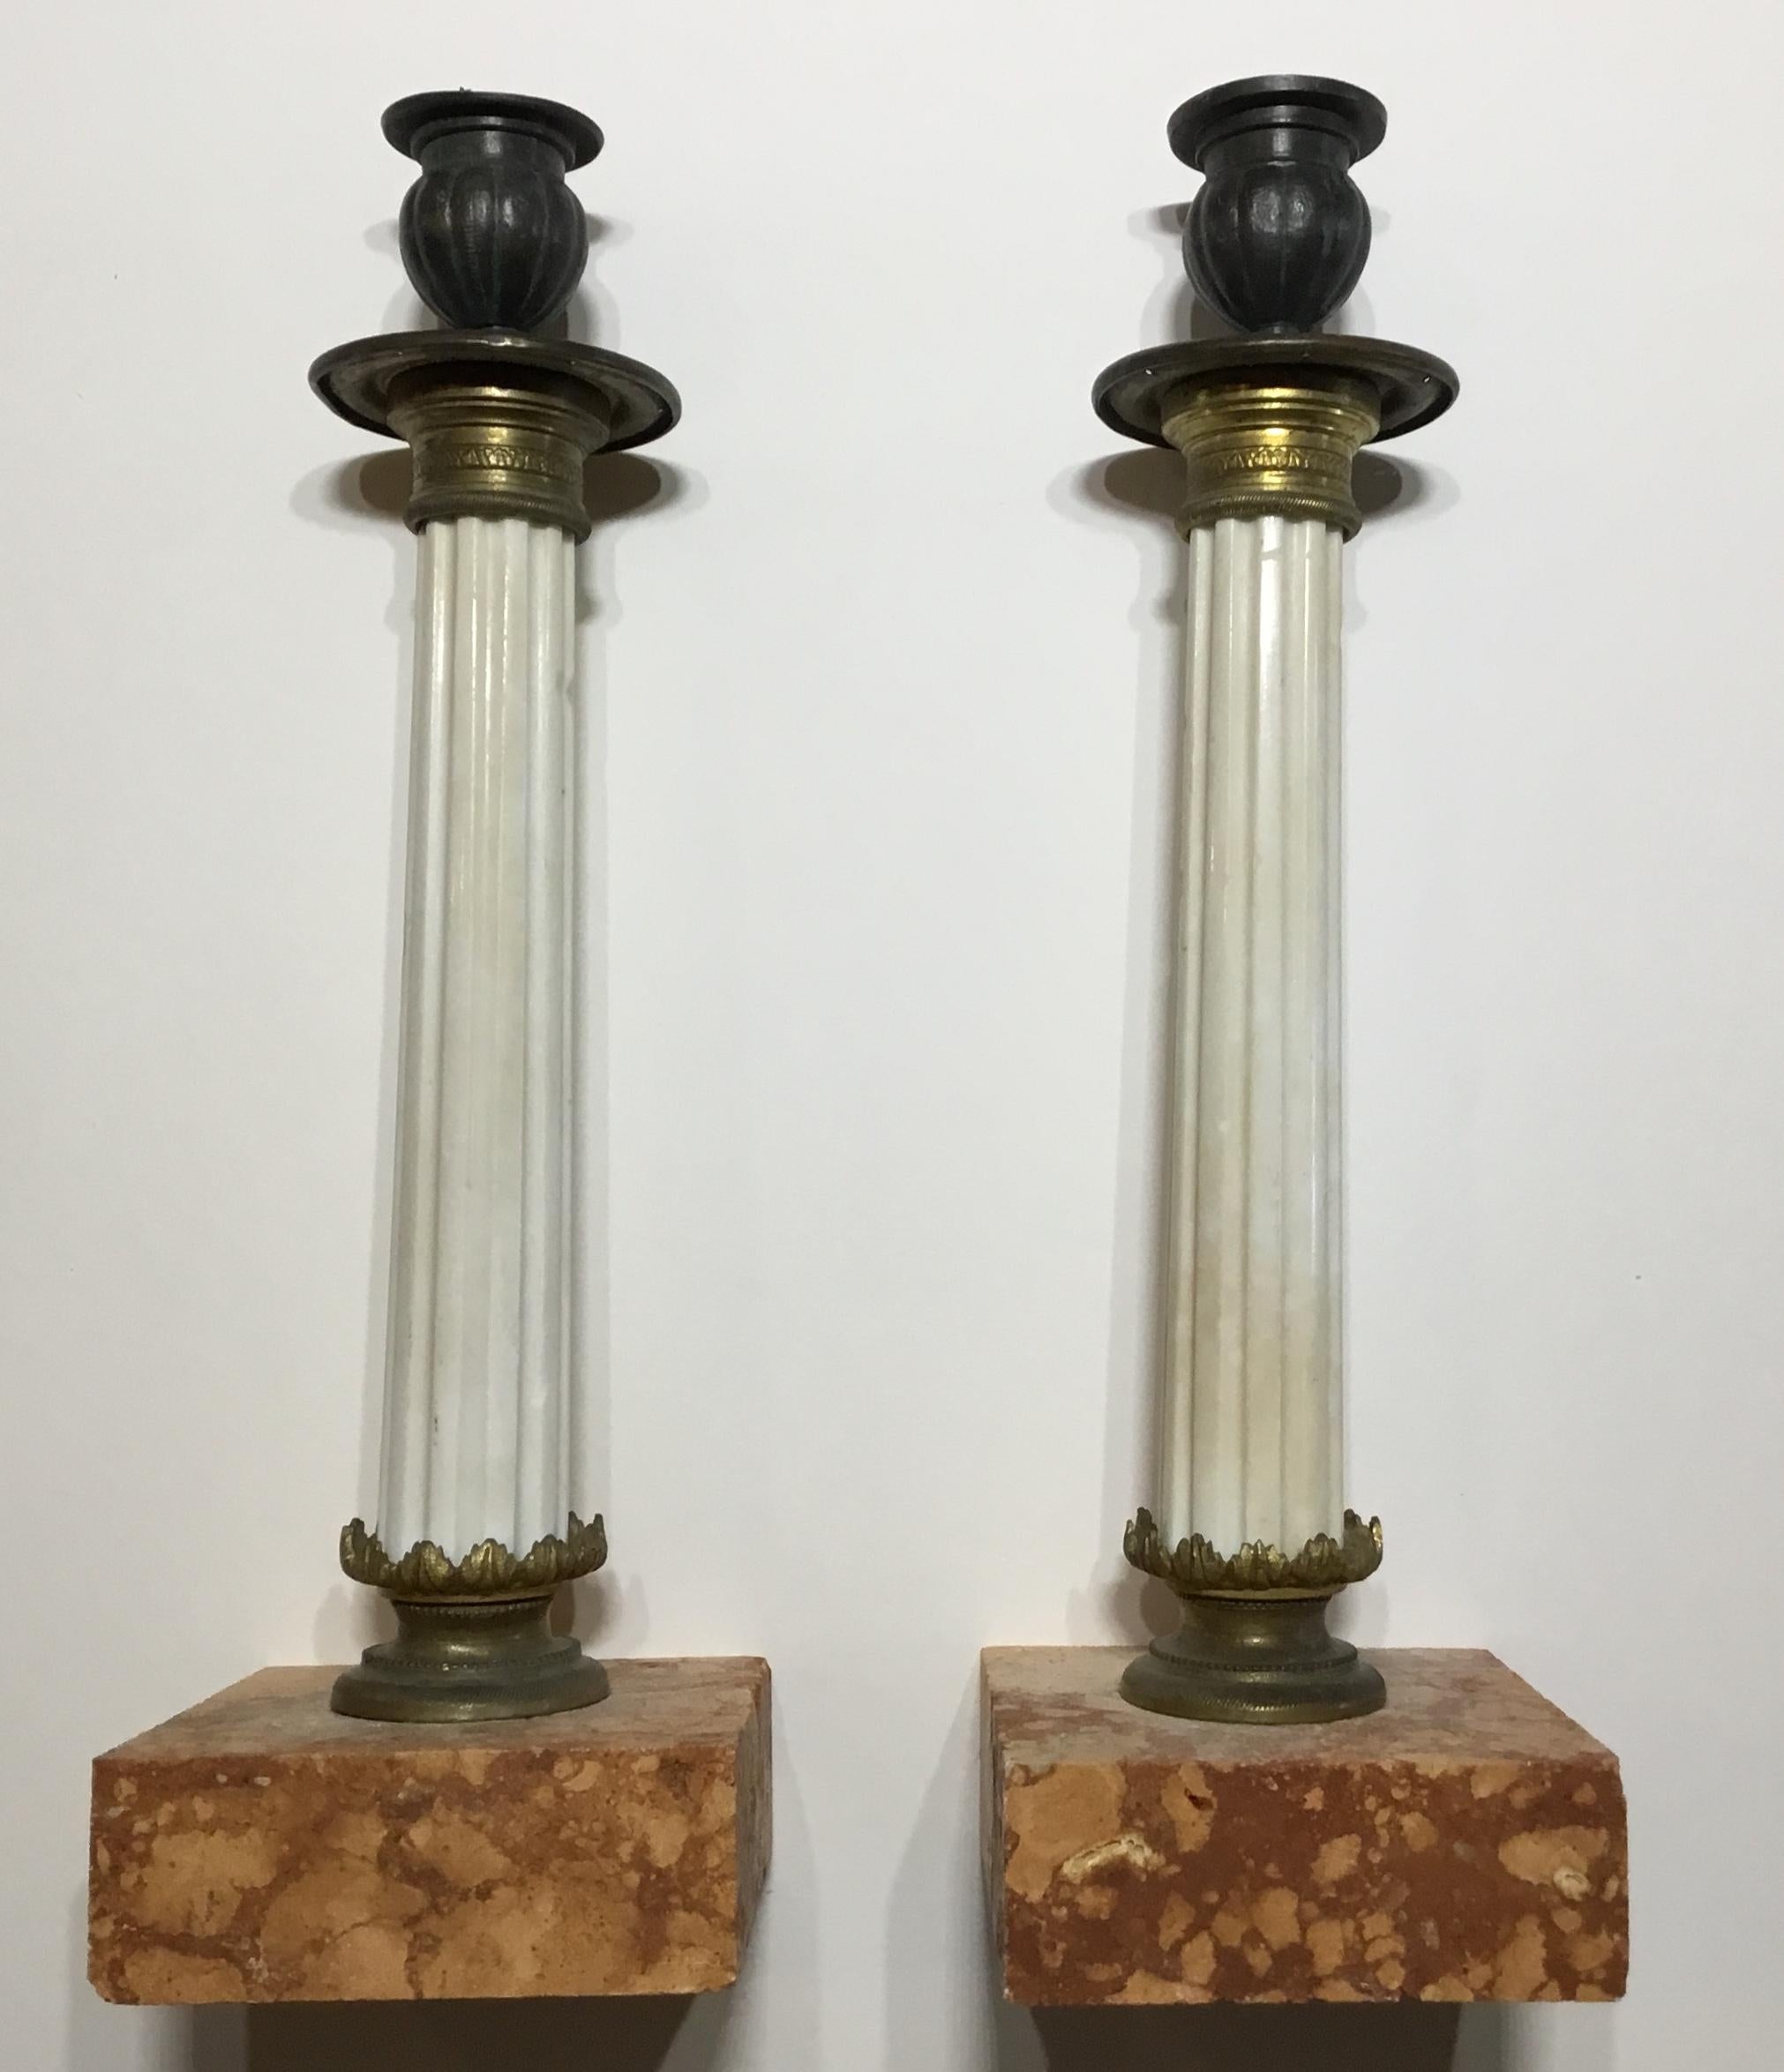 Beautiful pair of candlestick made of reddish granite base, hand carved white Italian marble body, and very detailed bronze and brass hardware. The top of the candlestick is made of old lead.
Great decorative pair any room.